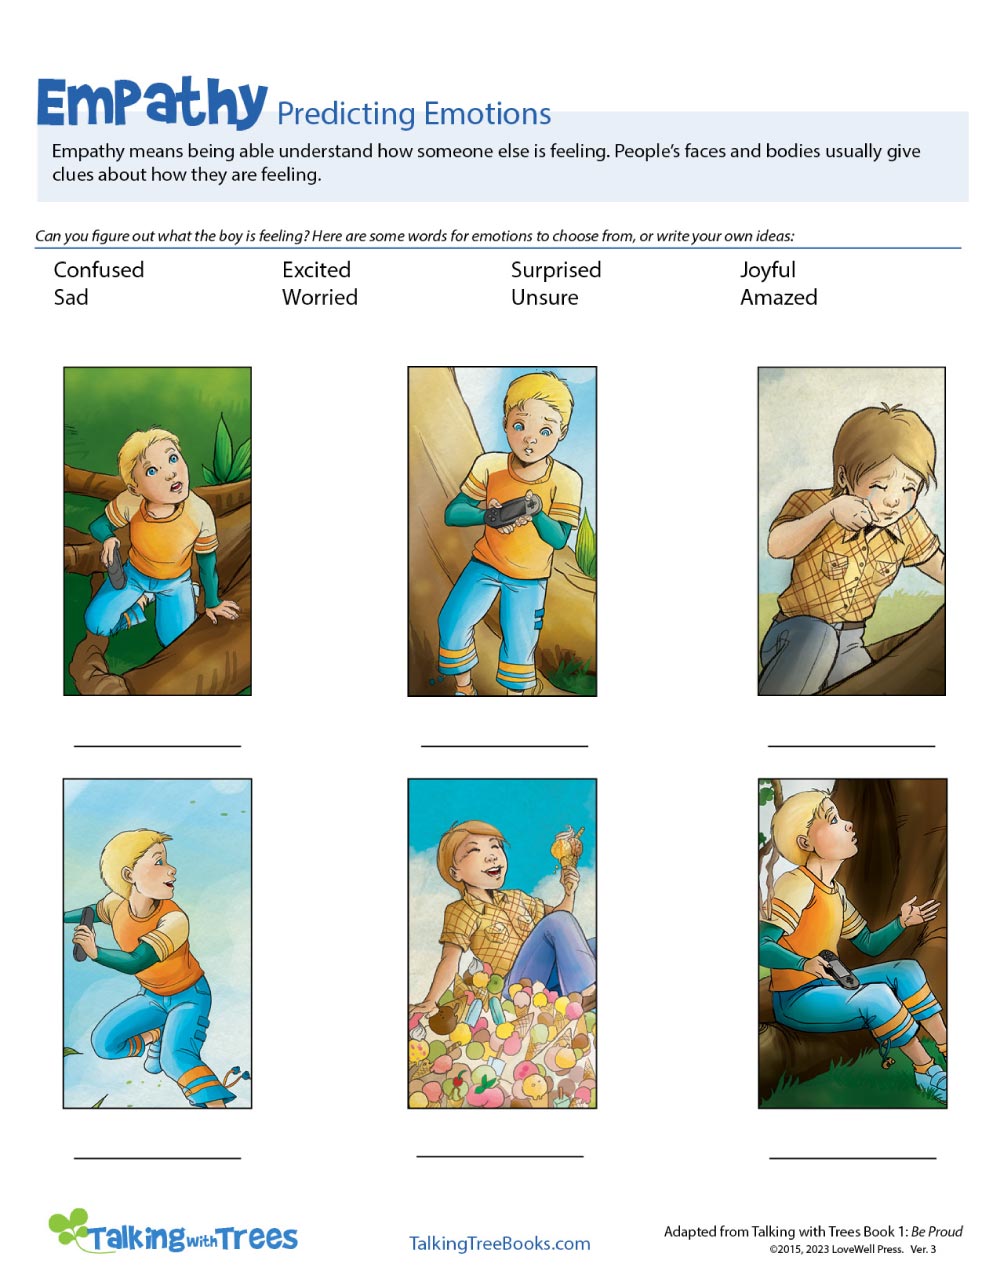 Empathy Worksheet on Predicting Emotions with Characters from Be Proud